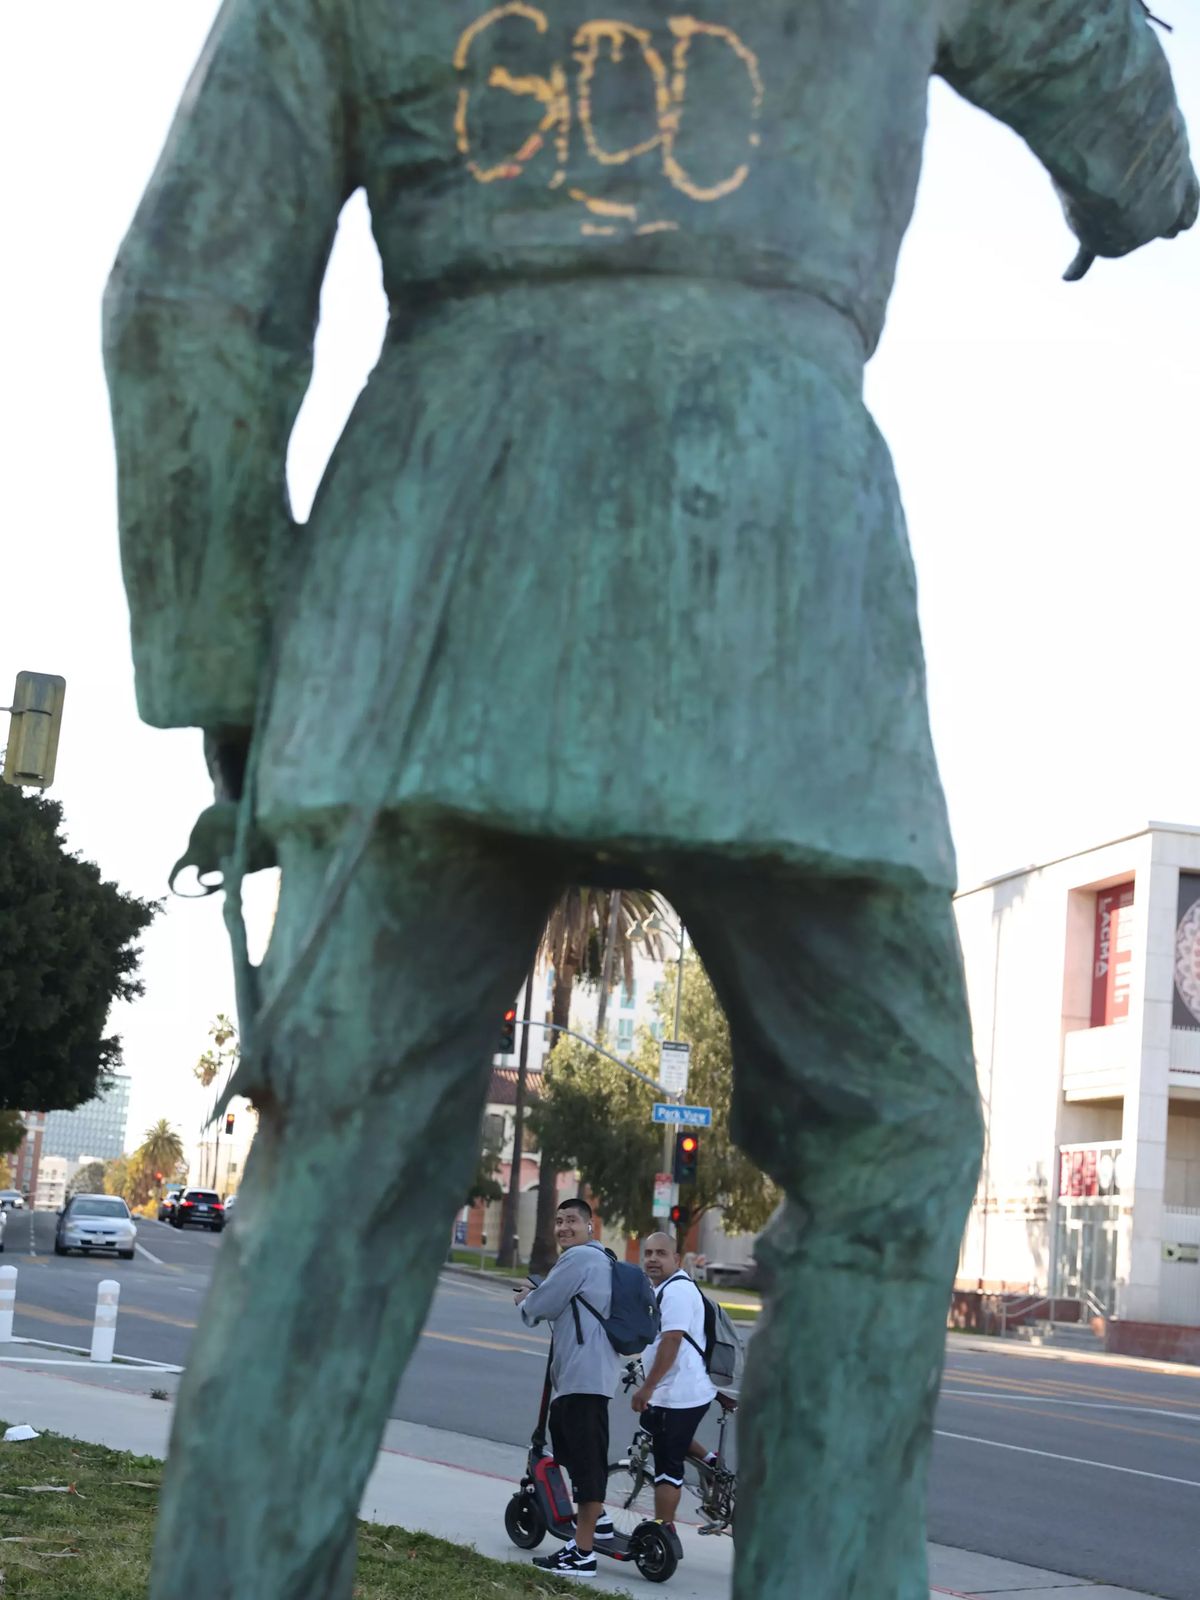 The statue of Harrison Gray Otis is located on a corner of MacArthur Park just off Wilshire Boulevard. Across the street was Otisâ€™ home, which he donated to the city to become the Otis Art Institute. (Michael Blackshire/Los Angeles Times/TNS)  (Michael Blackshire/Los Angeles Times/TNS)